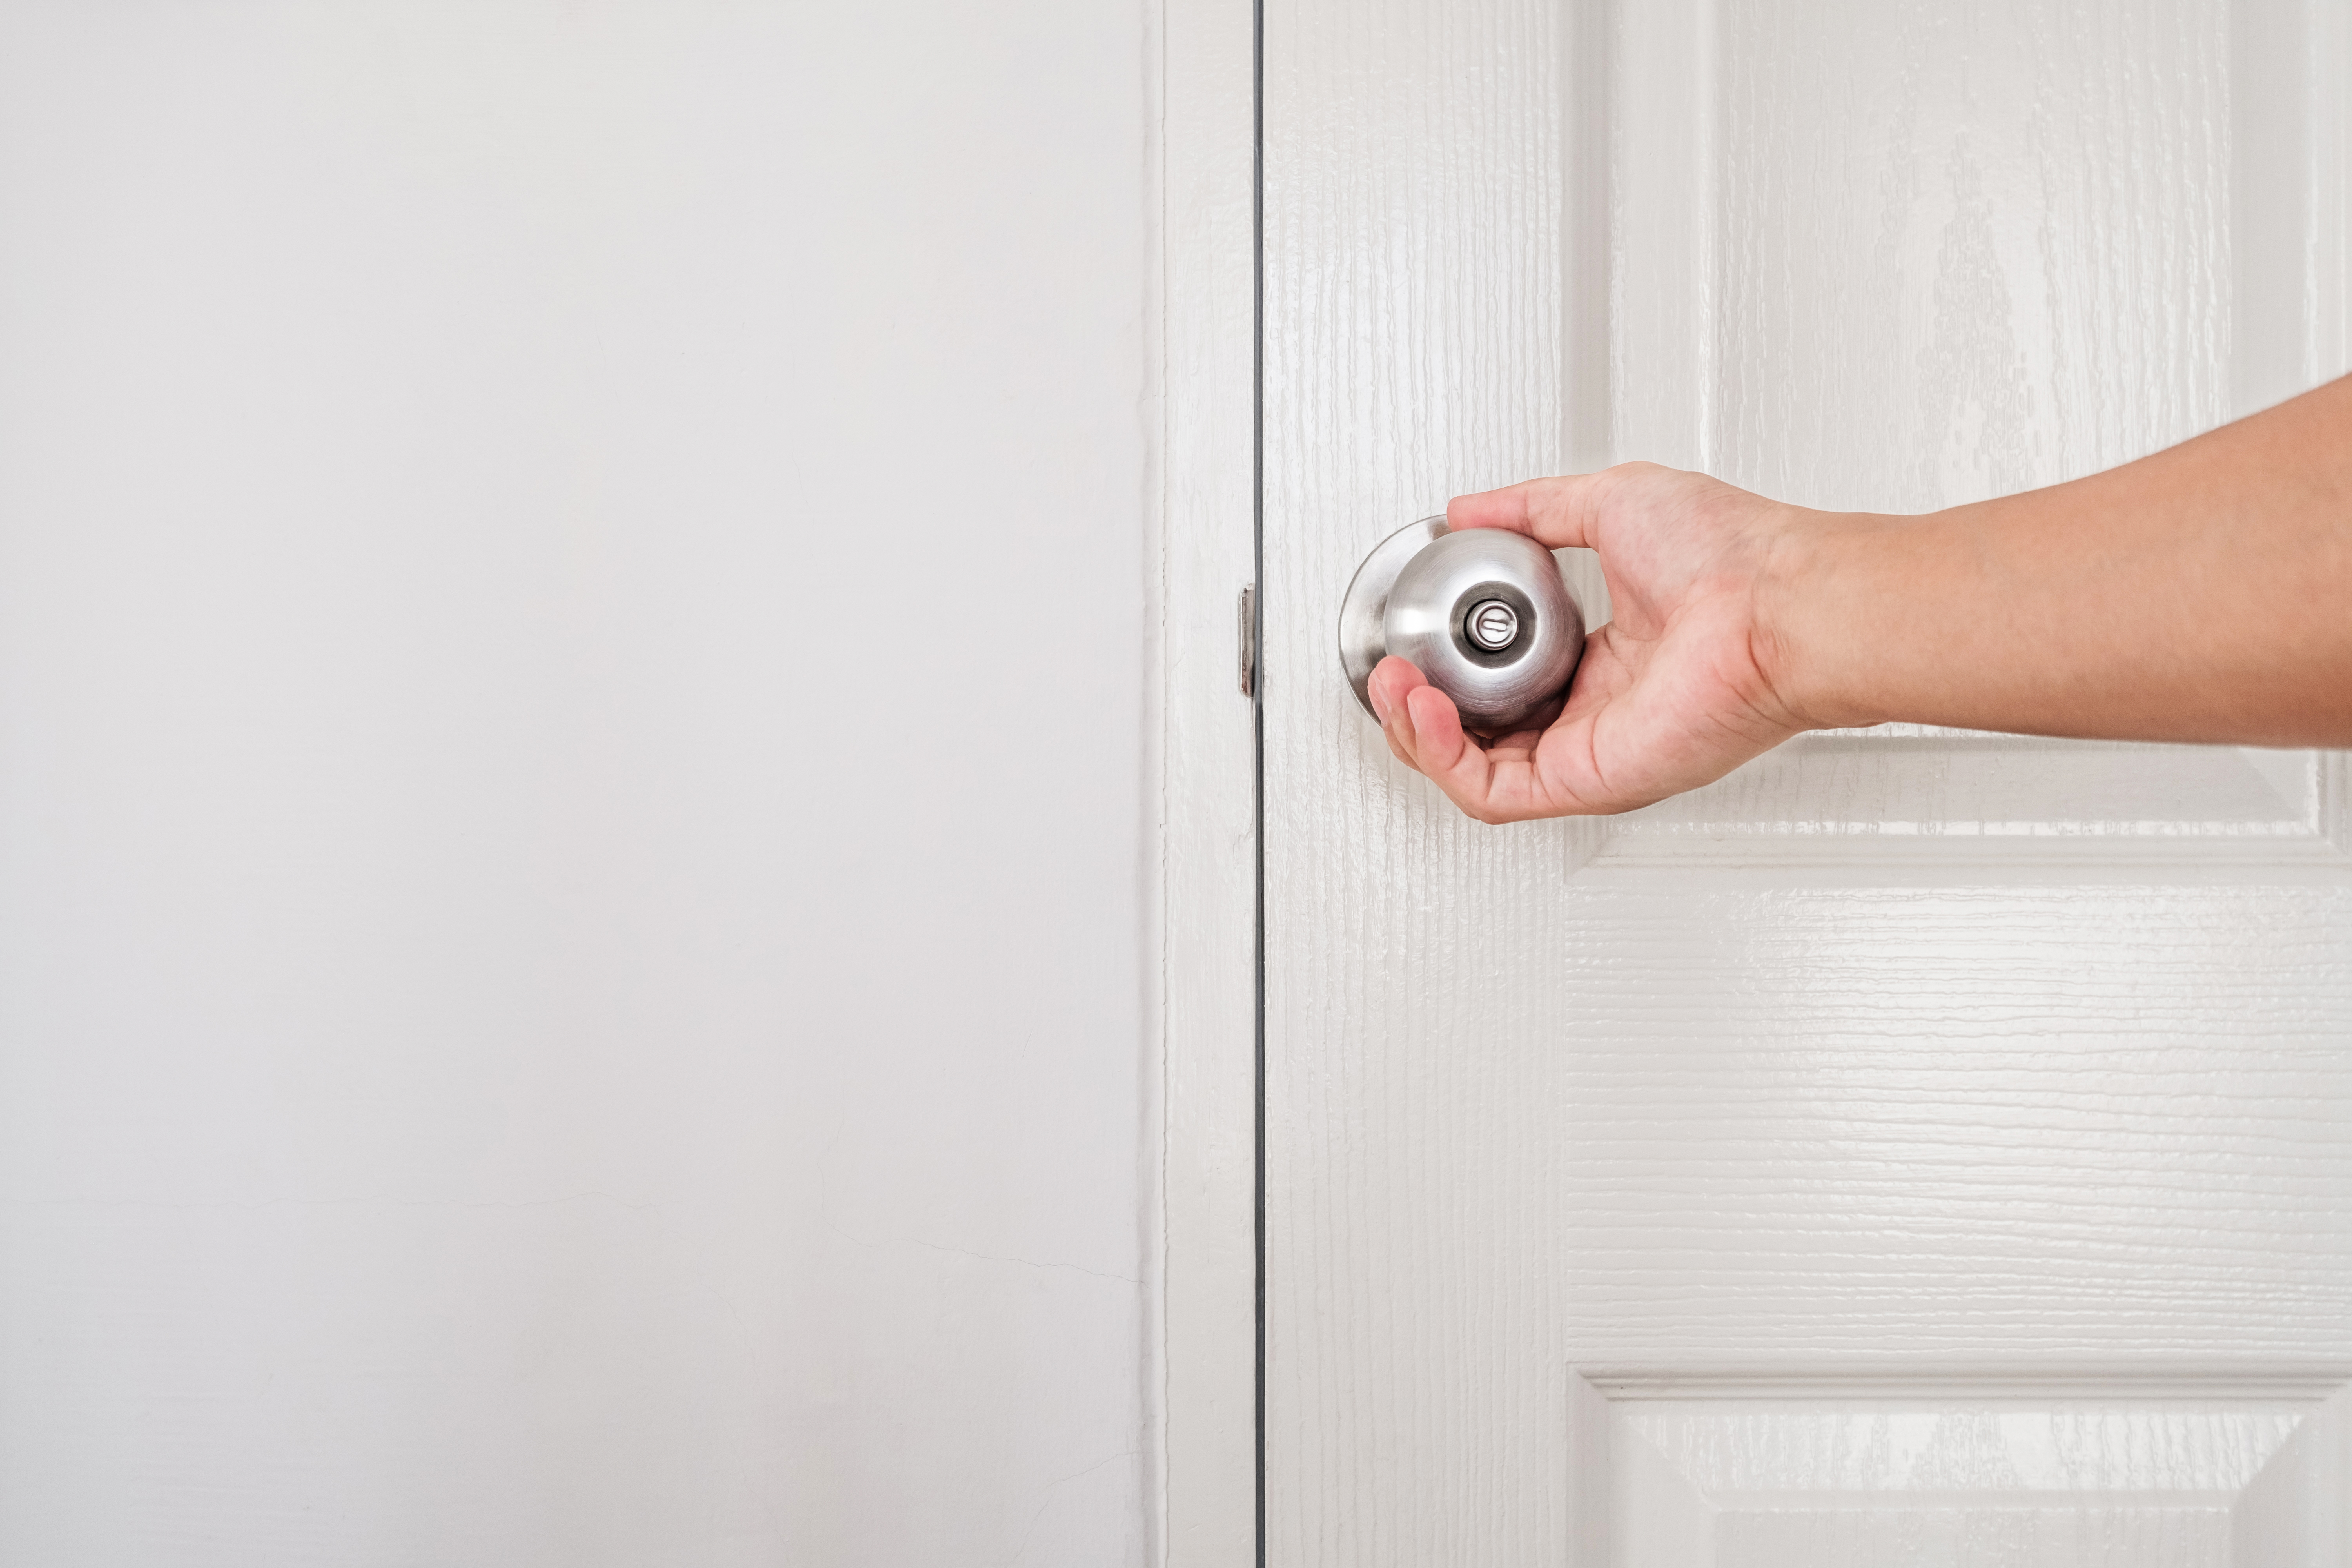 How To Unlock a Door: 7 Ways To Get in Without a Key